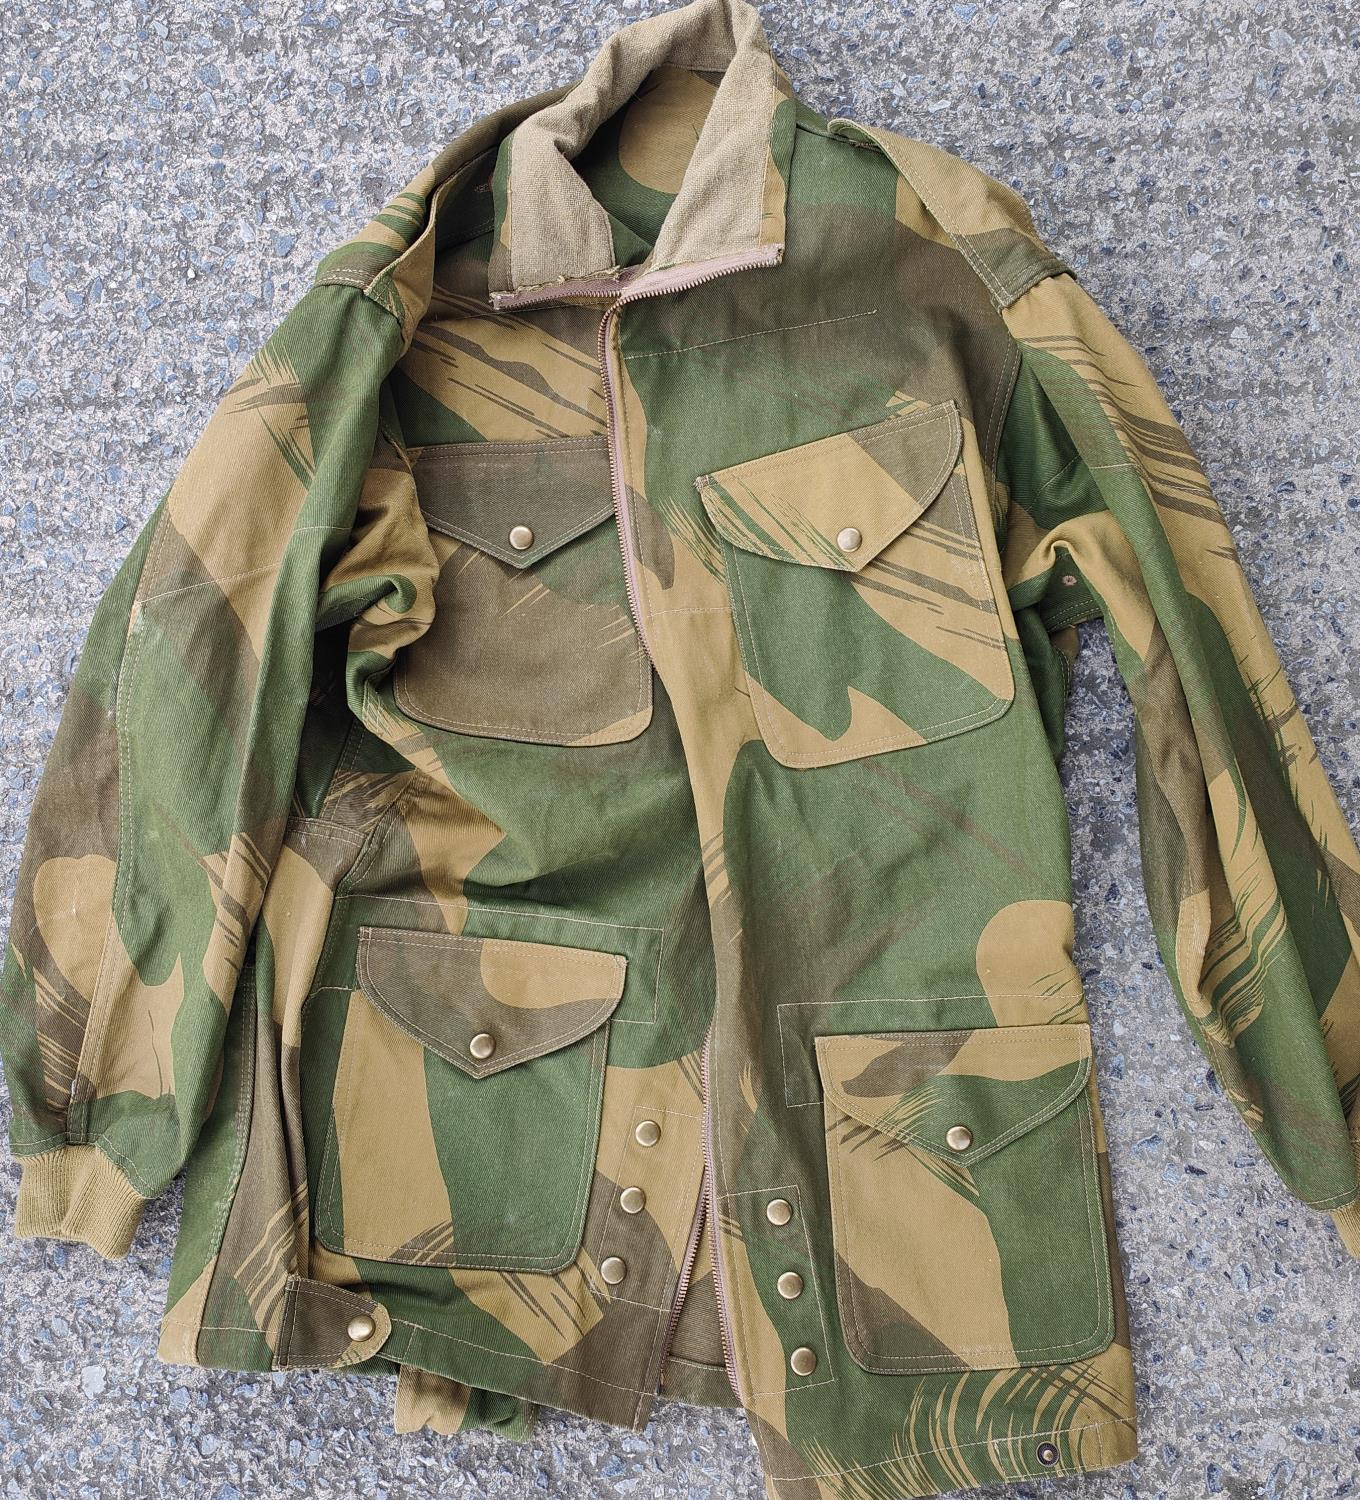 A WWII style camouflage airborne trouper Smock Denison, size 5 (large)